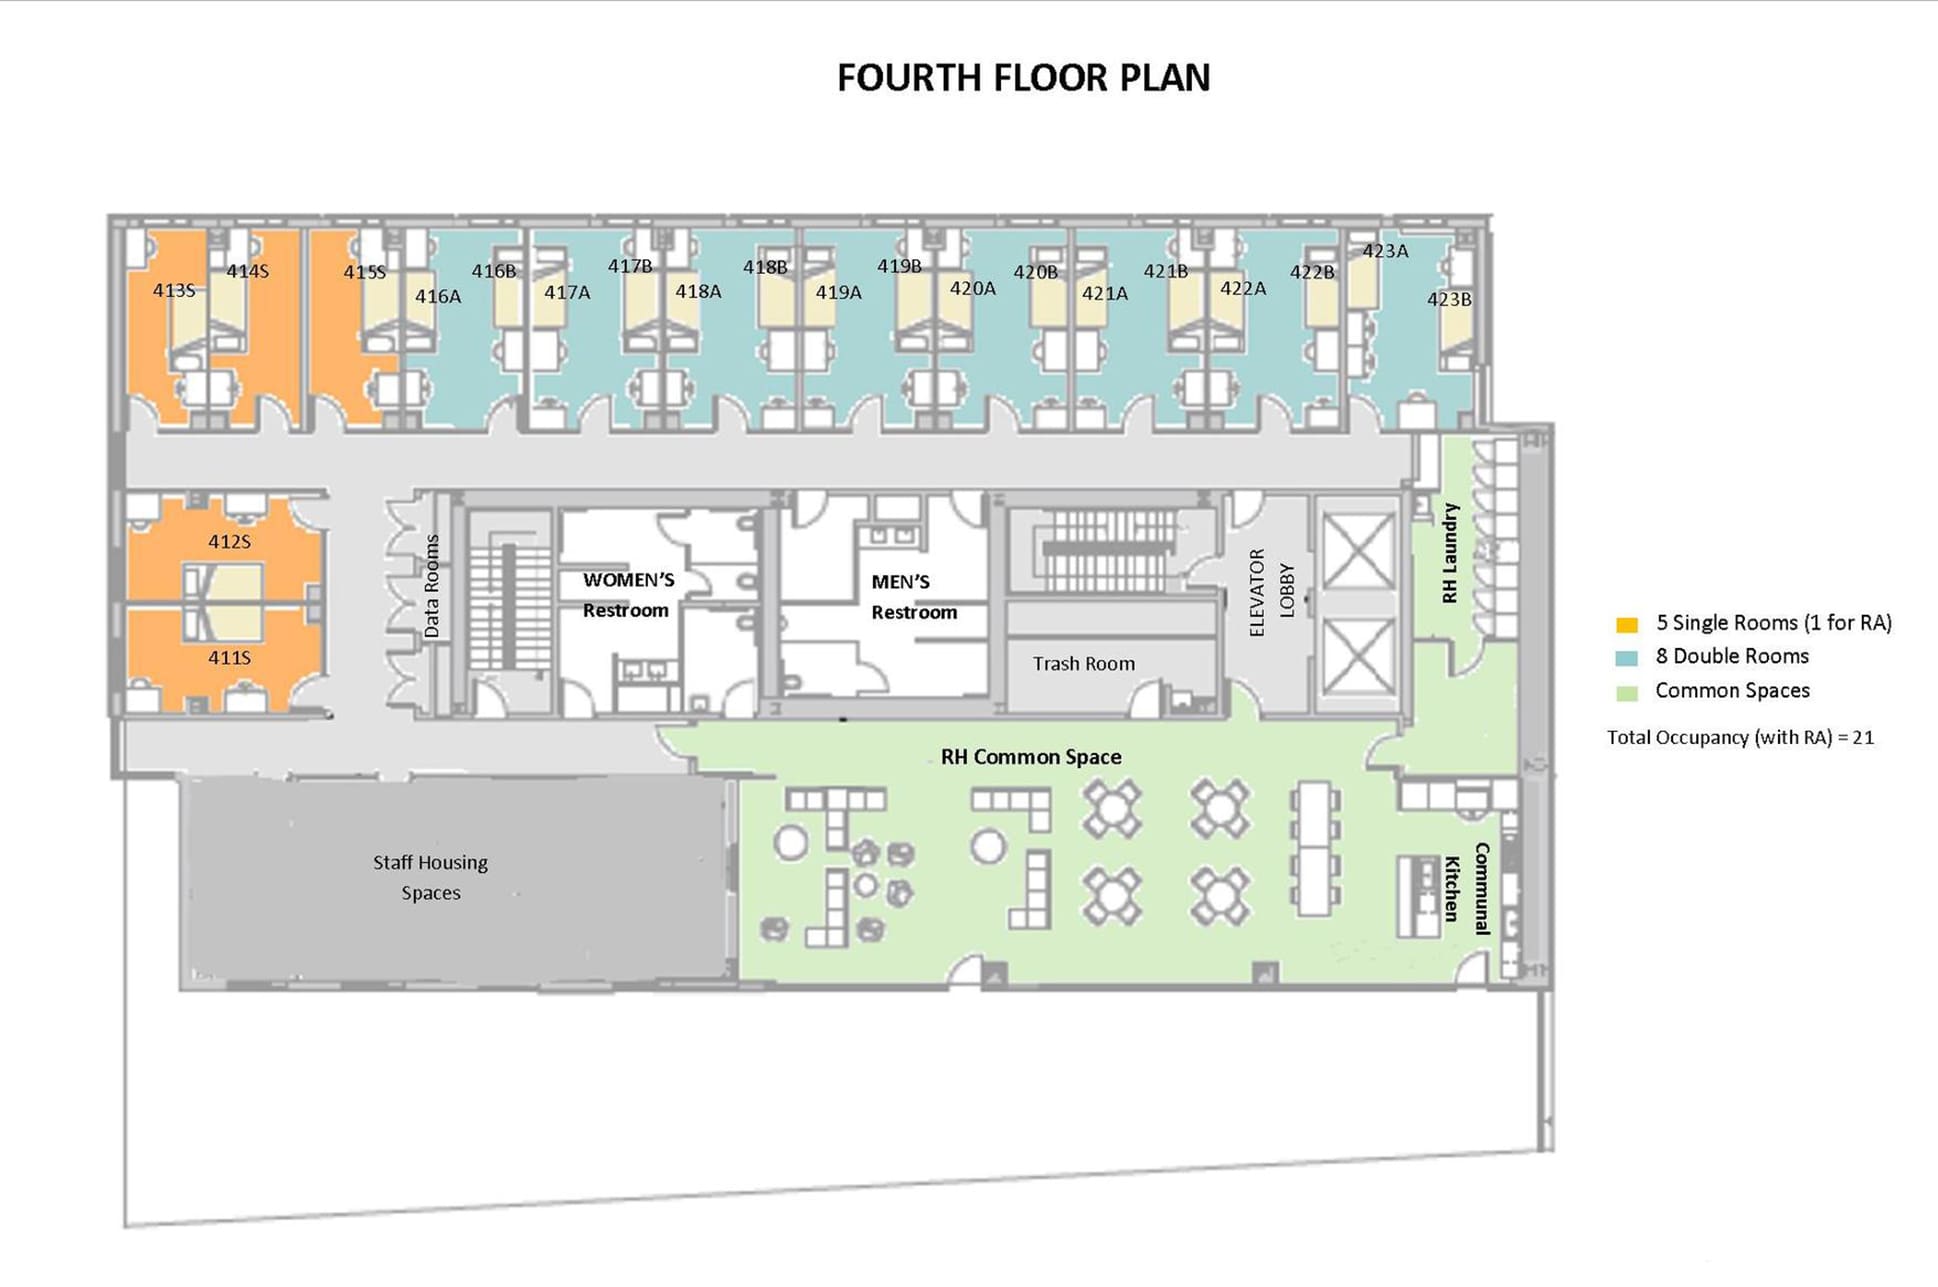 Floor plan diagram of the fourth floor in the NEC residence hall.